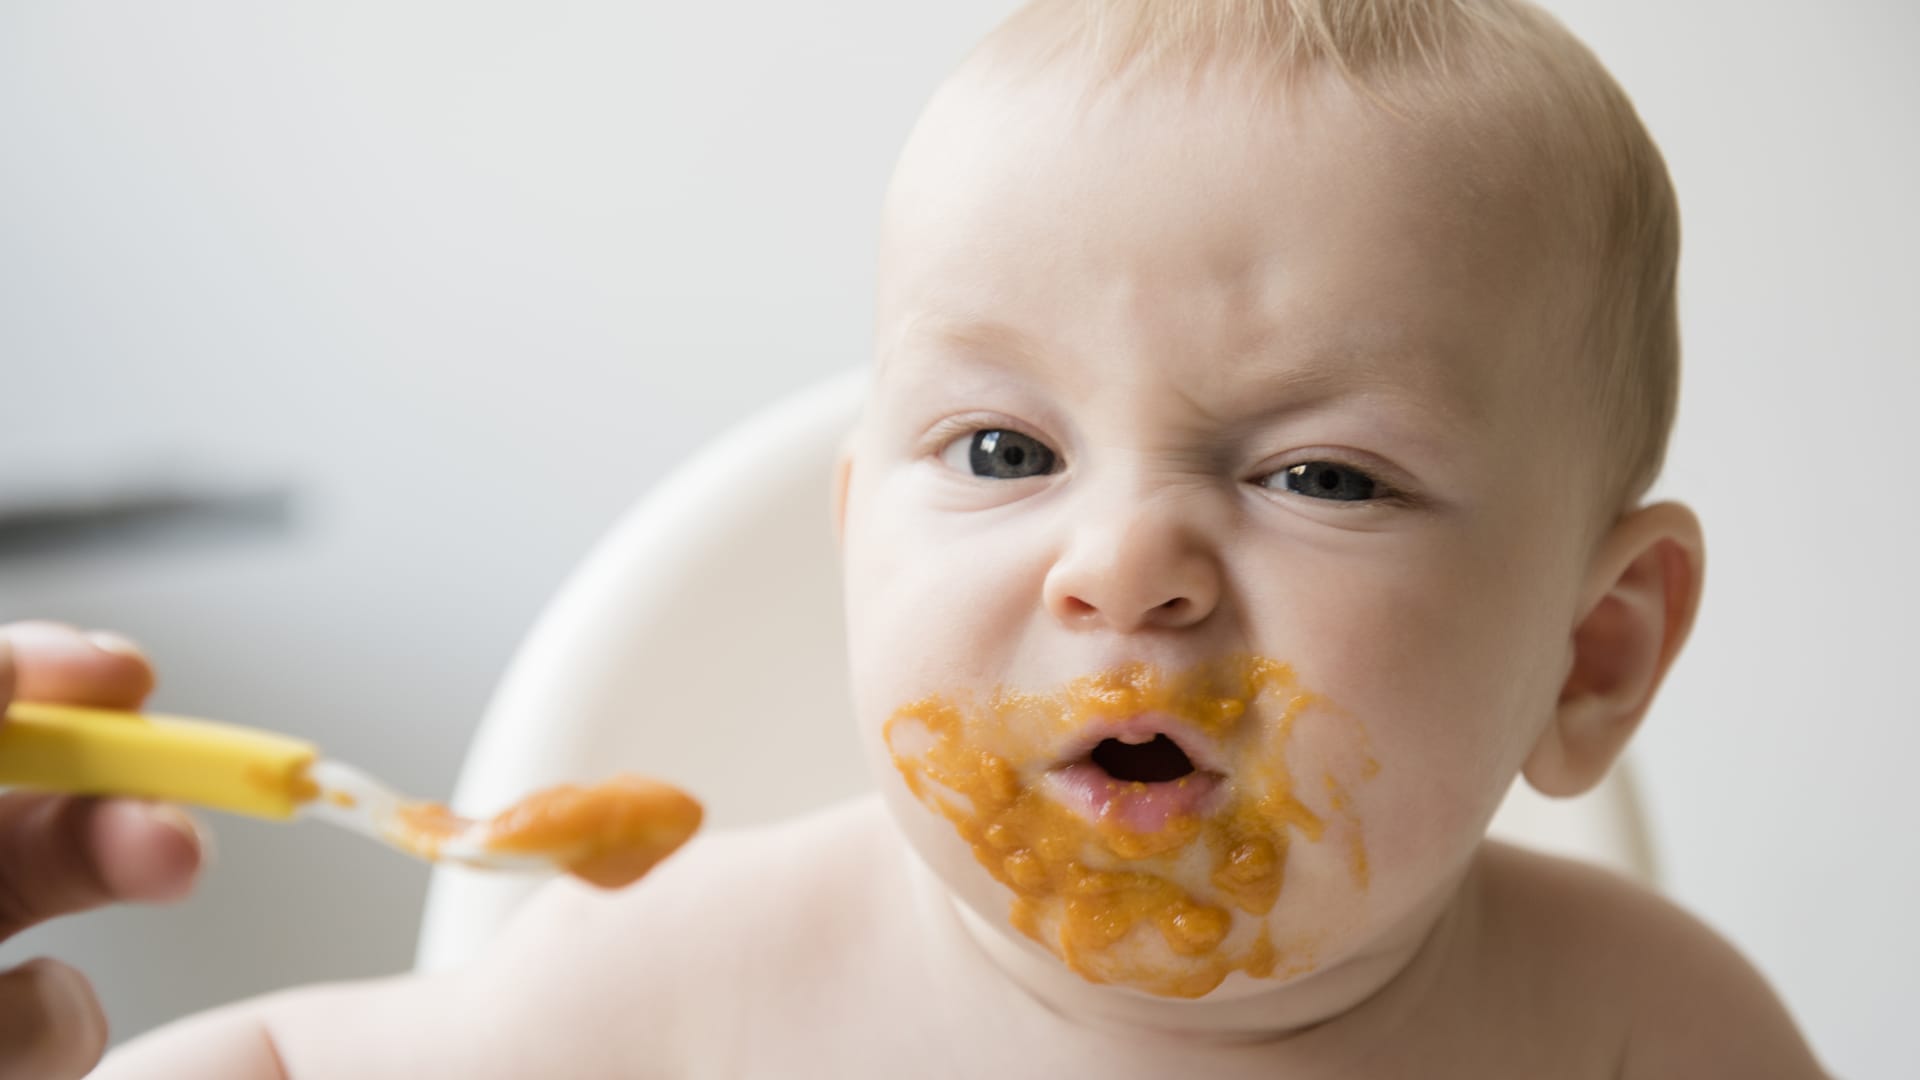 FDA proposes new lead limits for baby food to reduce potential risks to children’s health